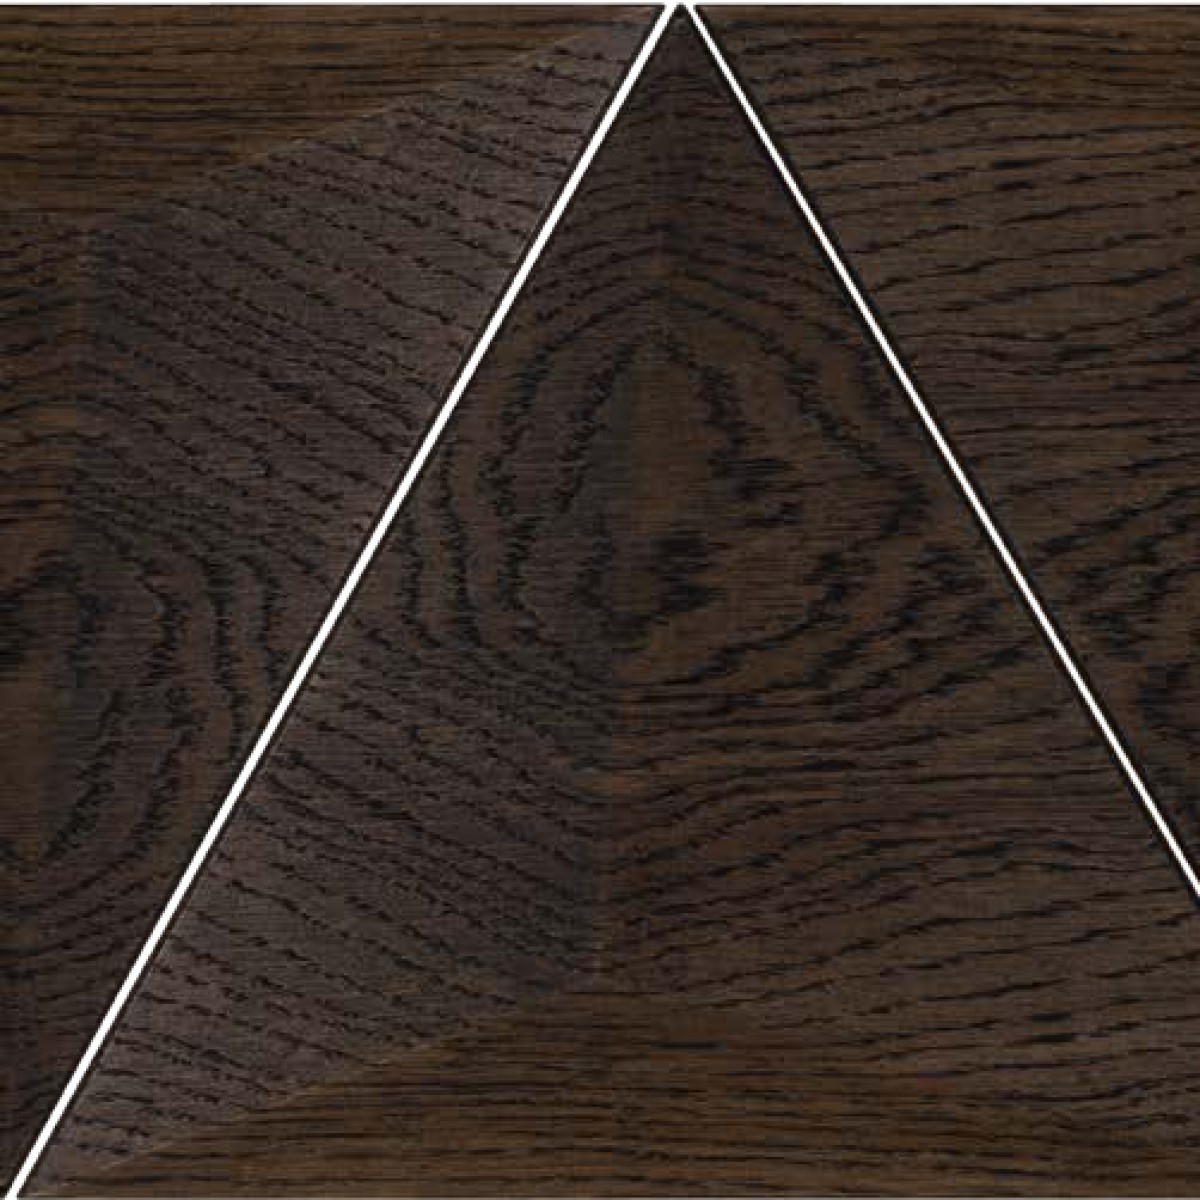 Panouri decorative din lemn FORM AT WOOD FRM-F01, material: